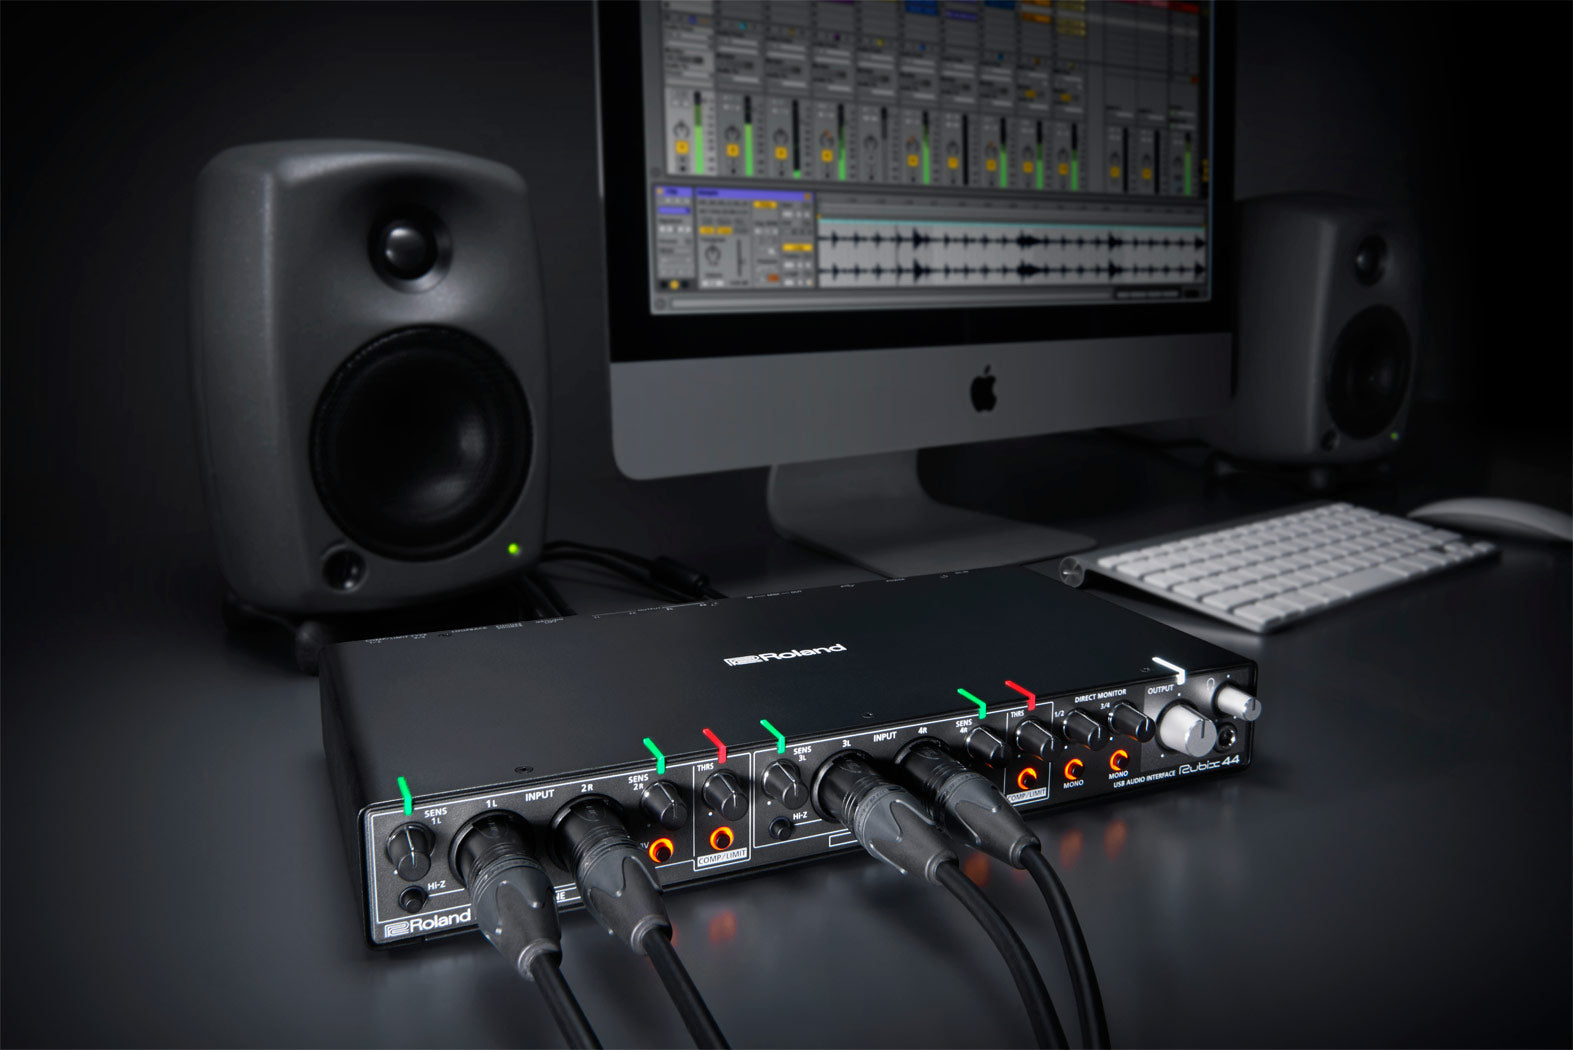 Roland Rubix 44 Class-Compliant 4-In/4-Out Usb Audio/Midi Interface